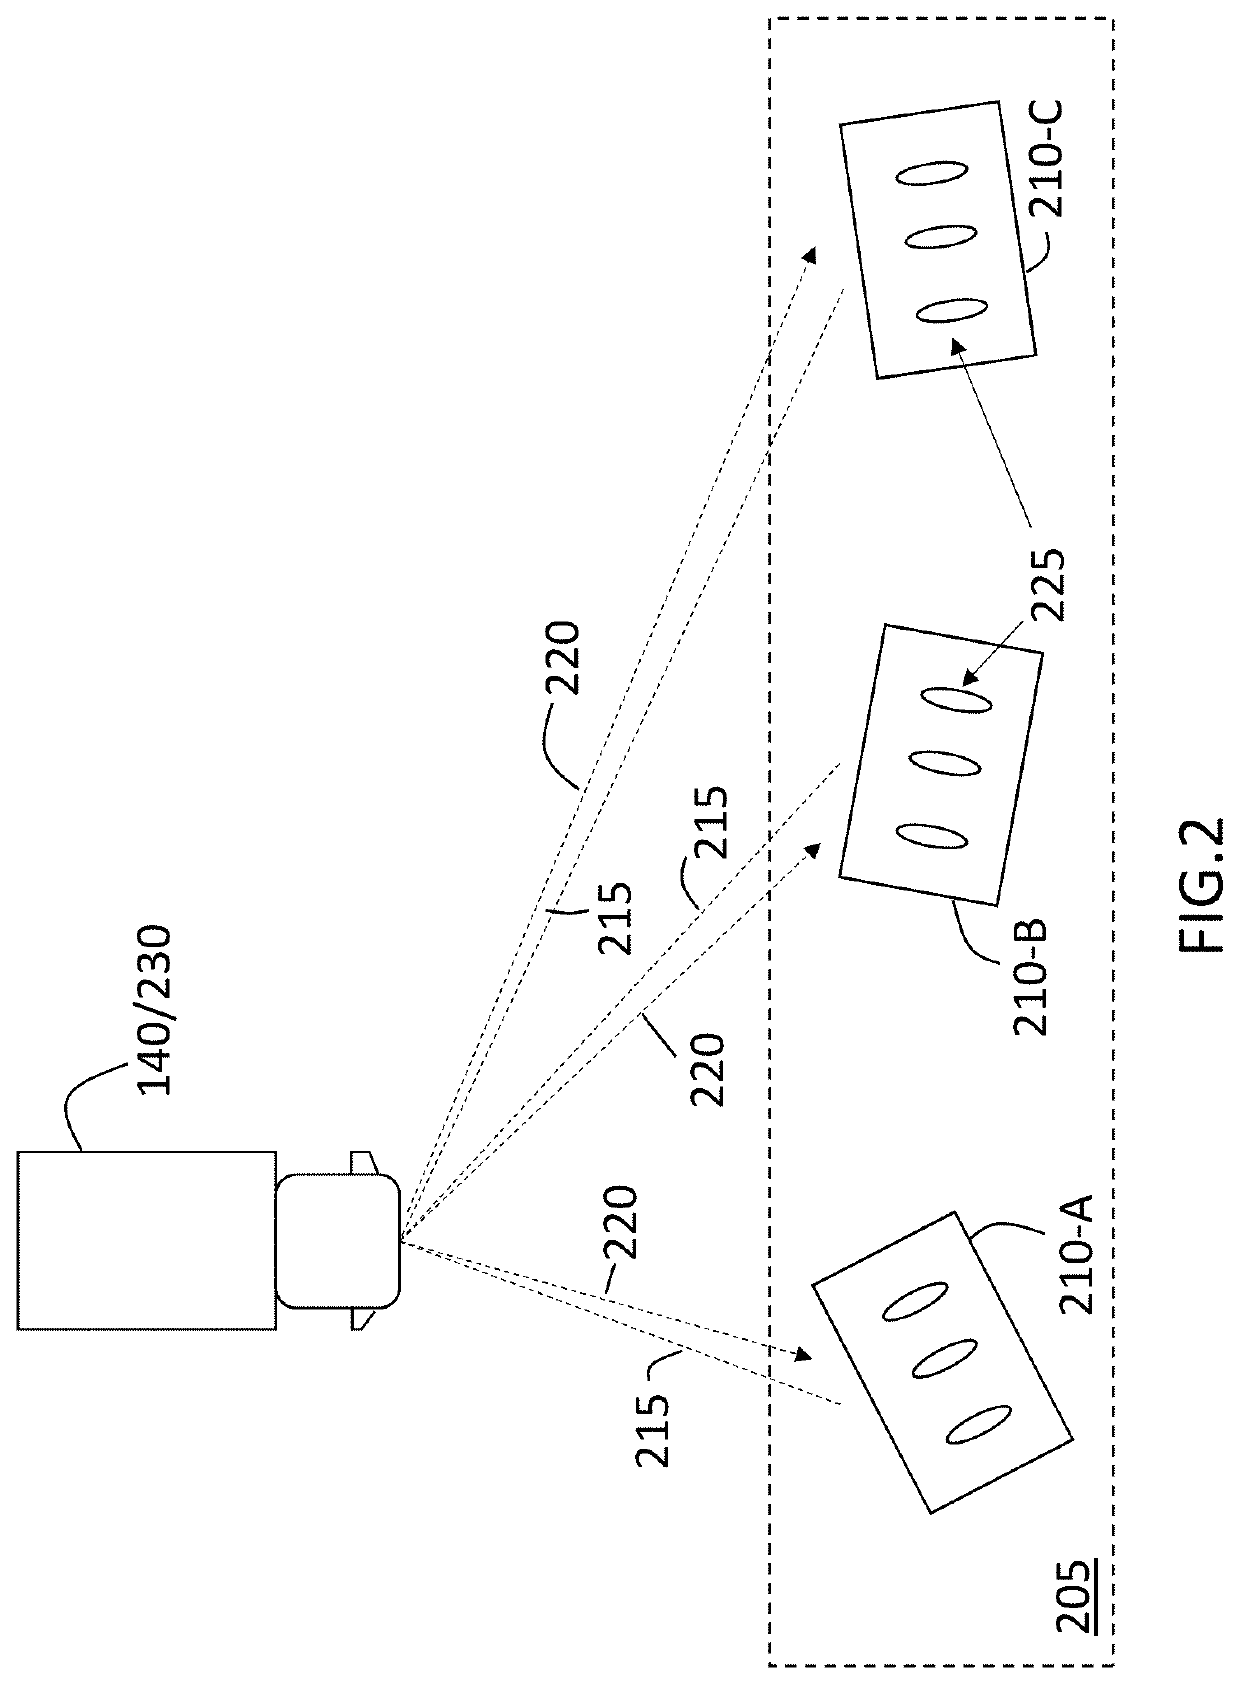 Antenna array tilt and processing to eliminate false detections in a radar system